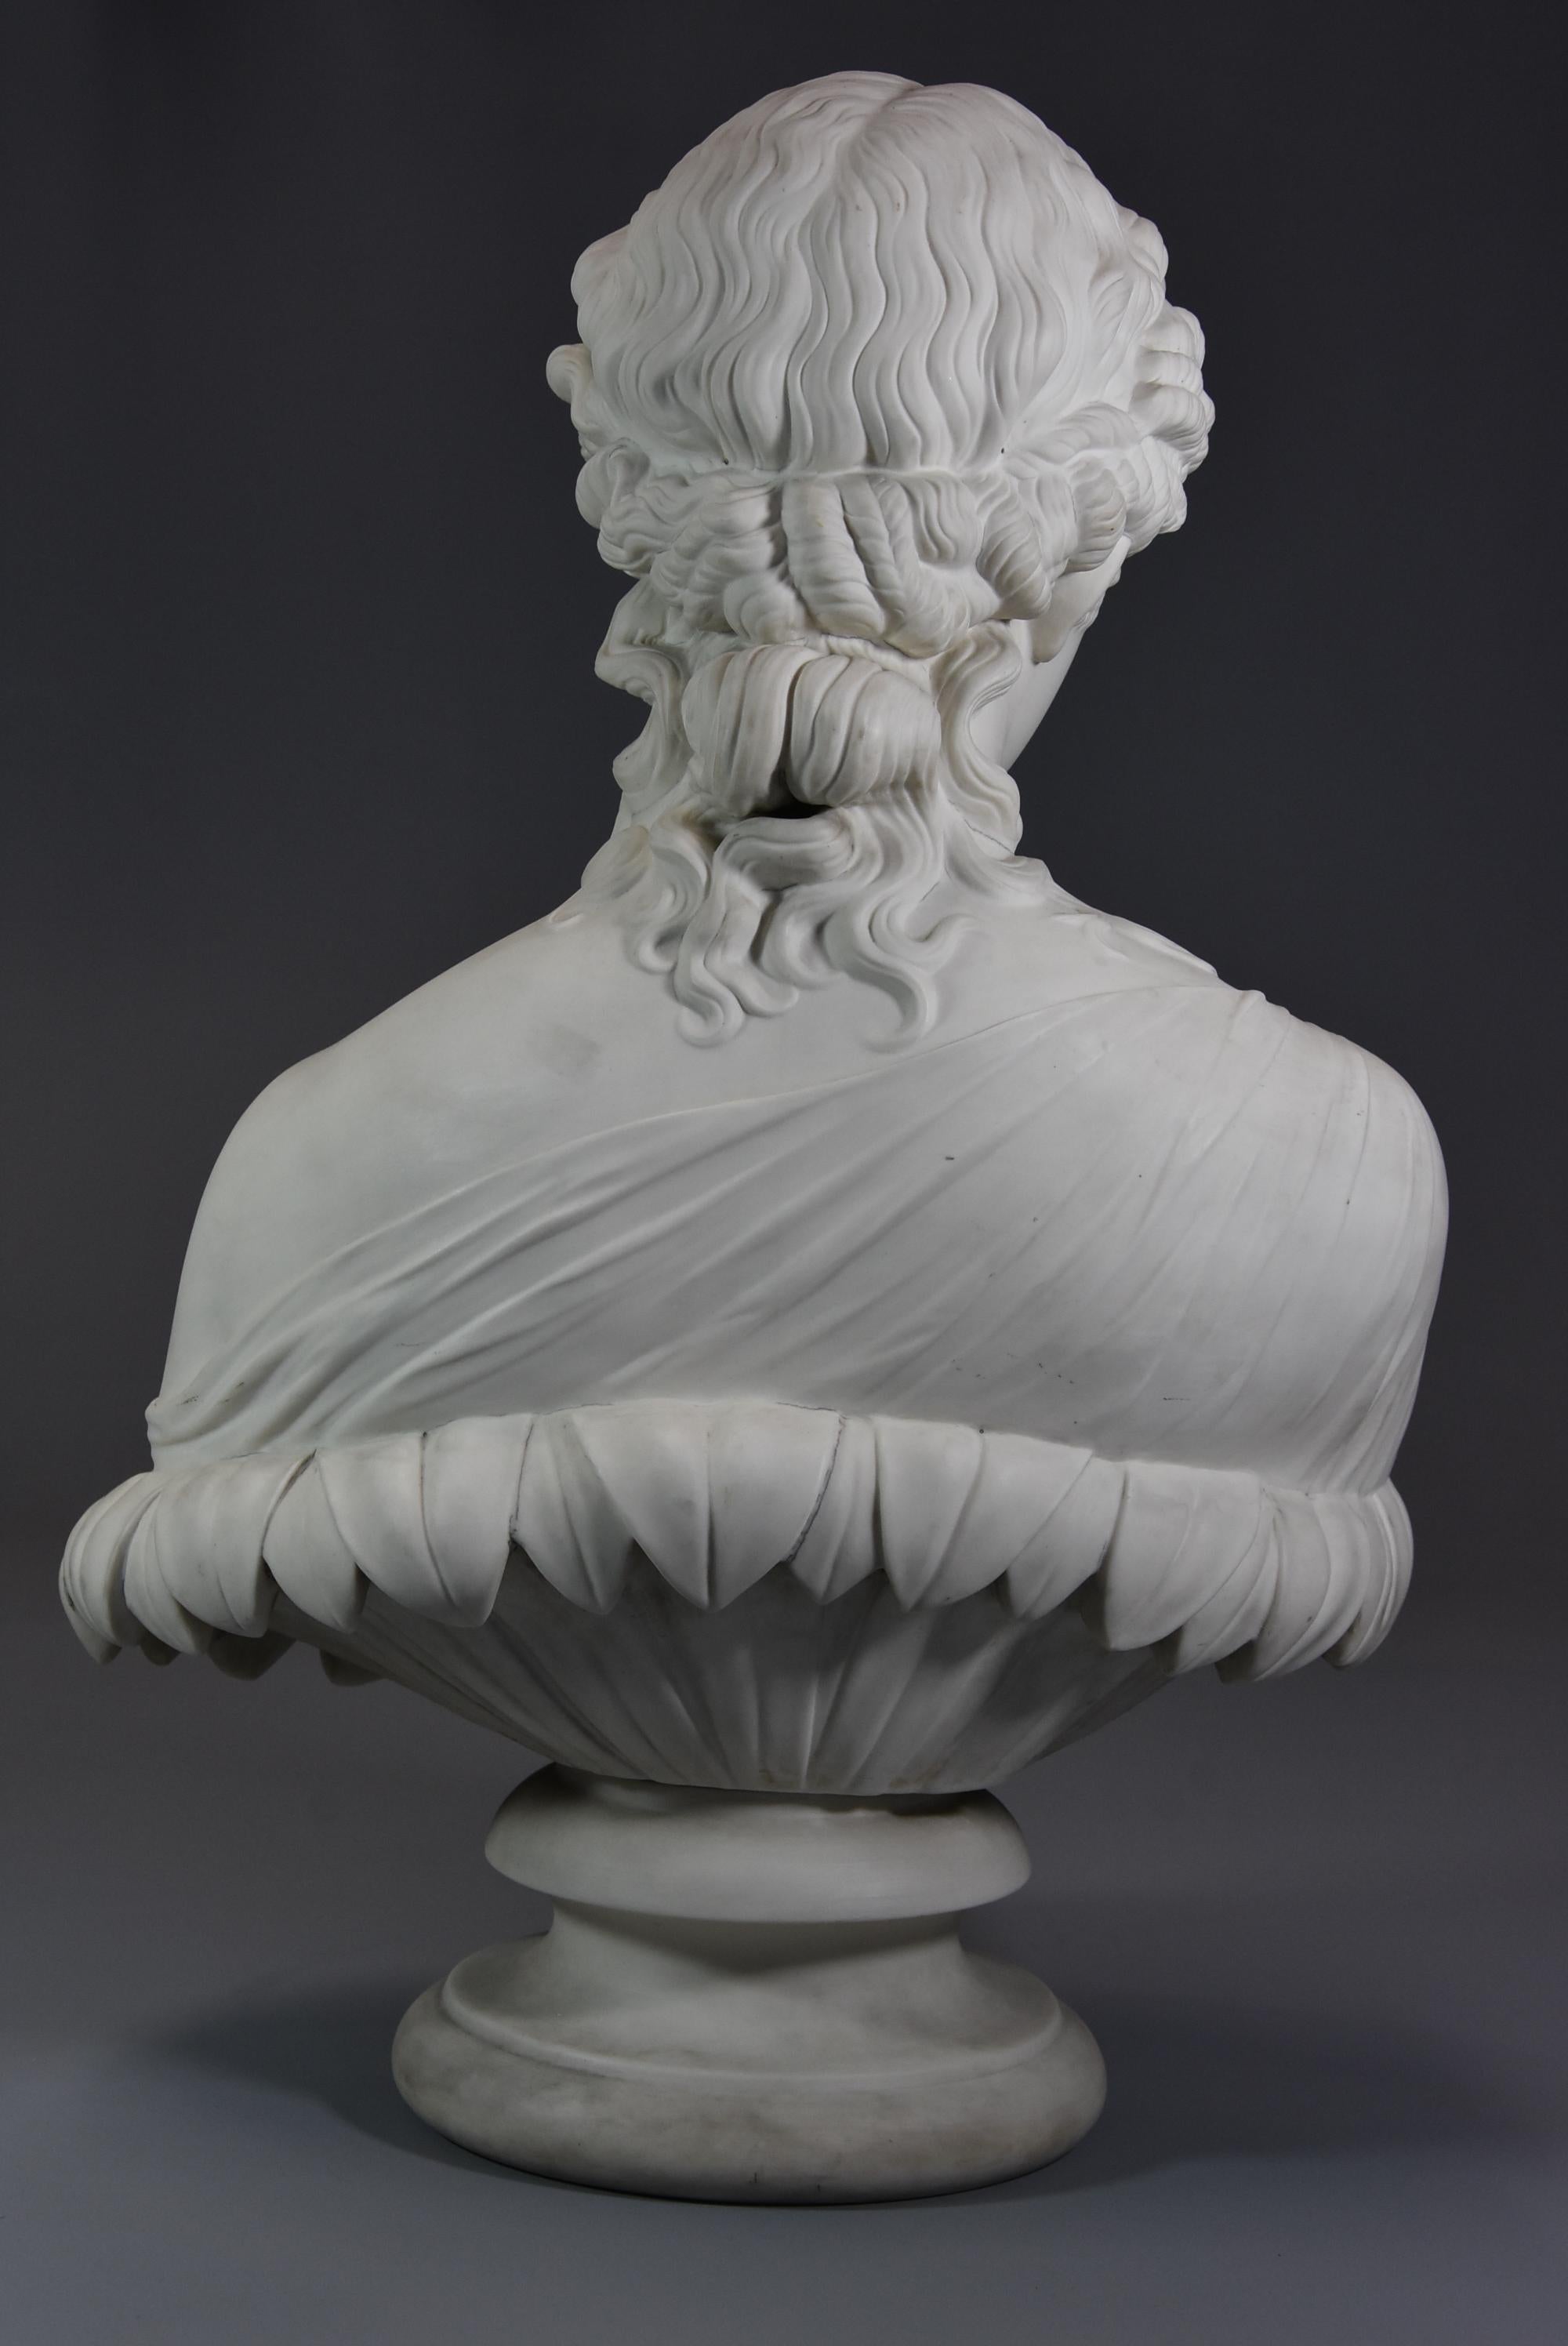 Decorative Large Mid-19th Century Parian Bust of ‘Clytie’, Stamped ‘Copeland' 5